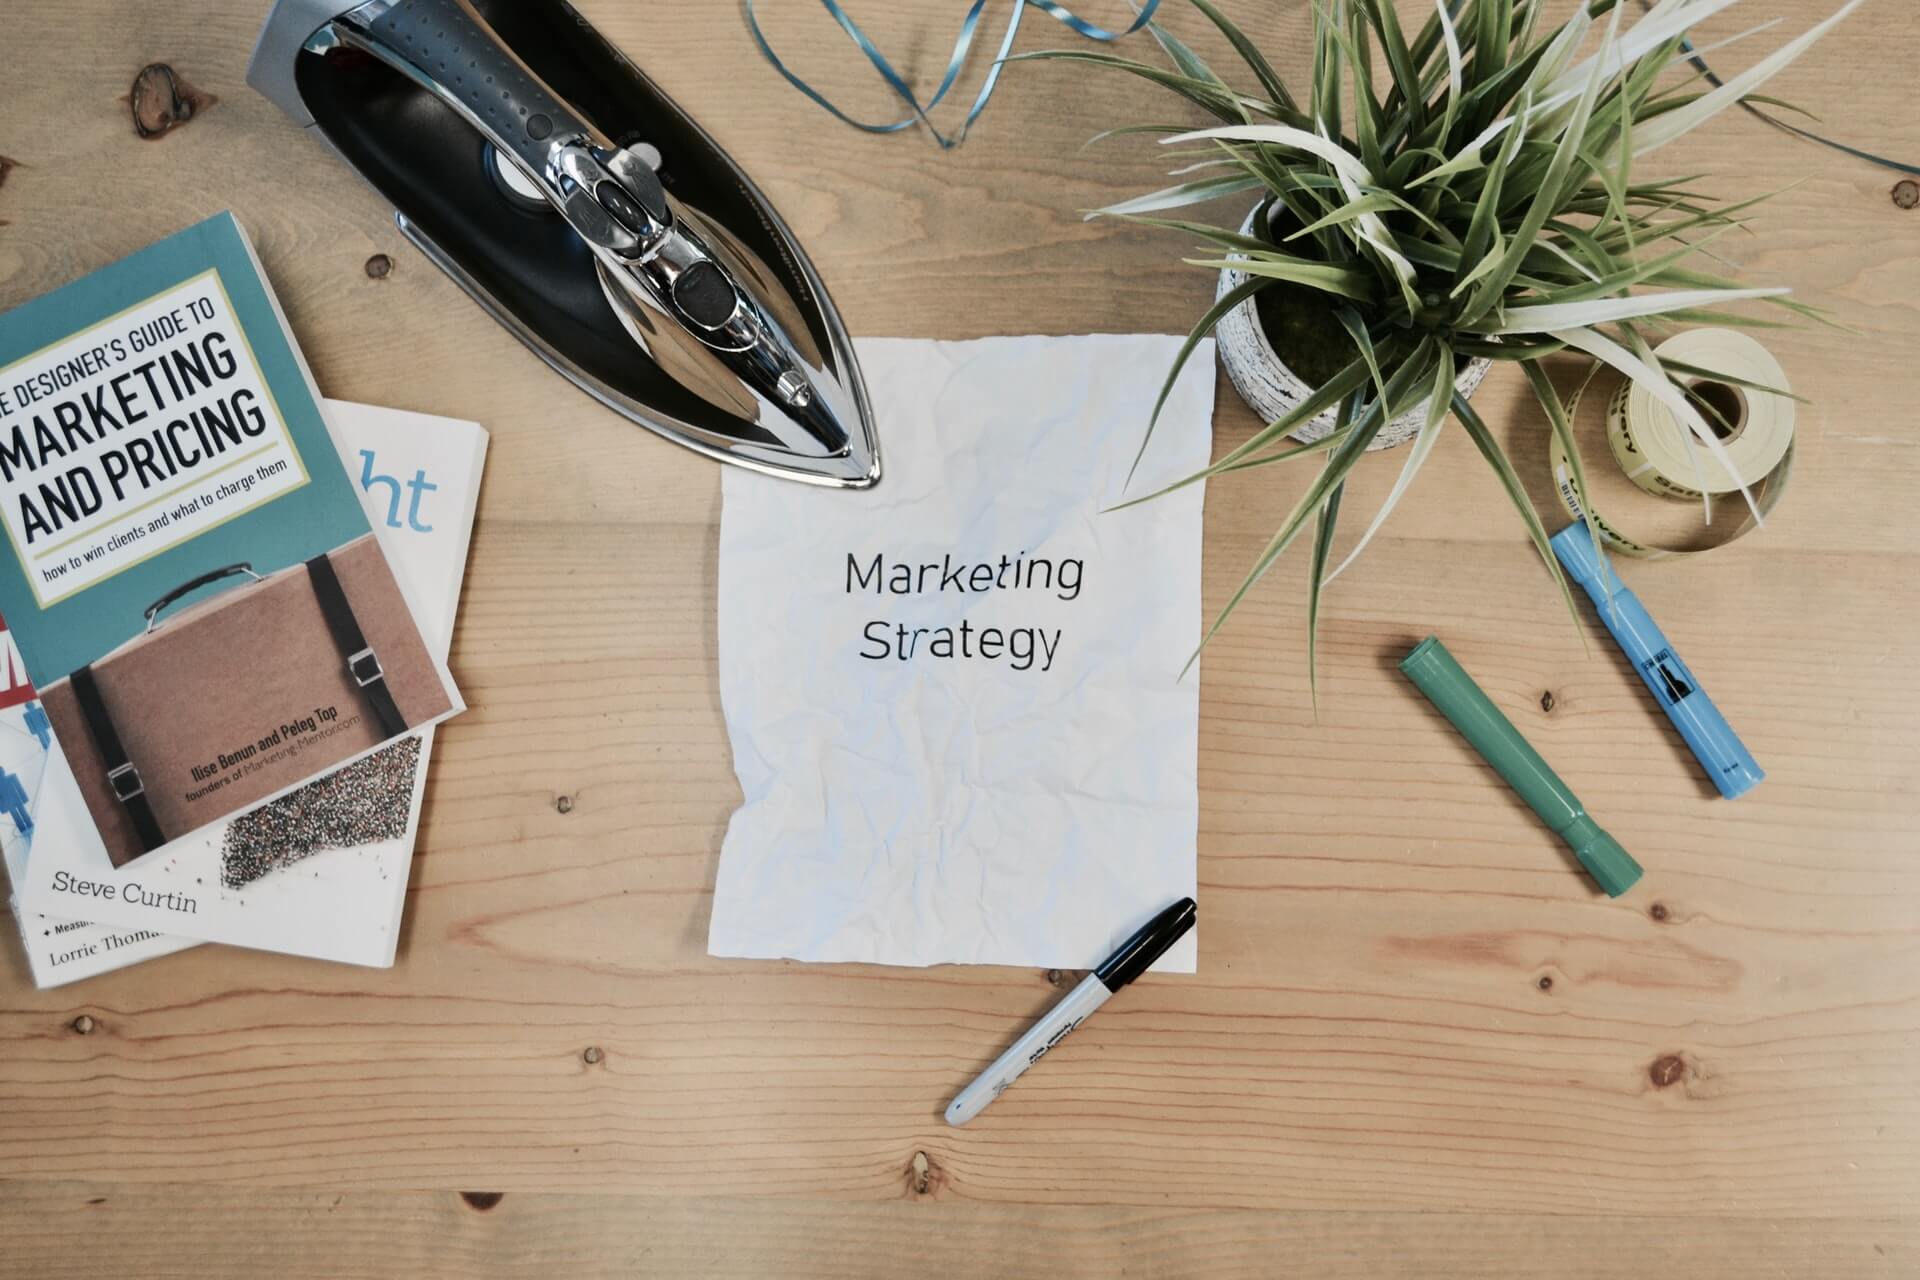 A marketing strategy written on a note placed on a desk